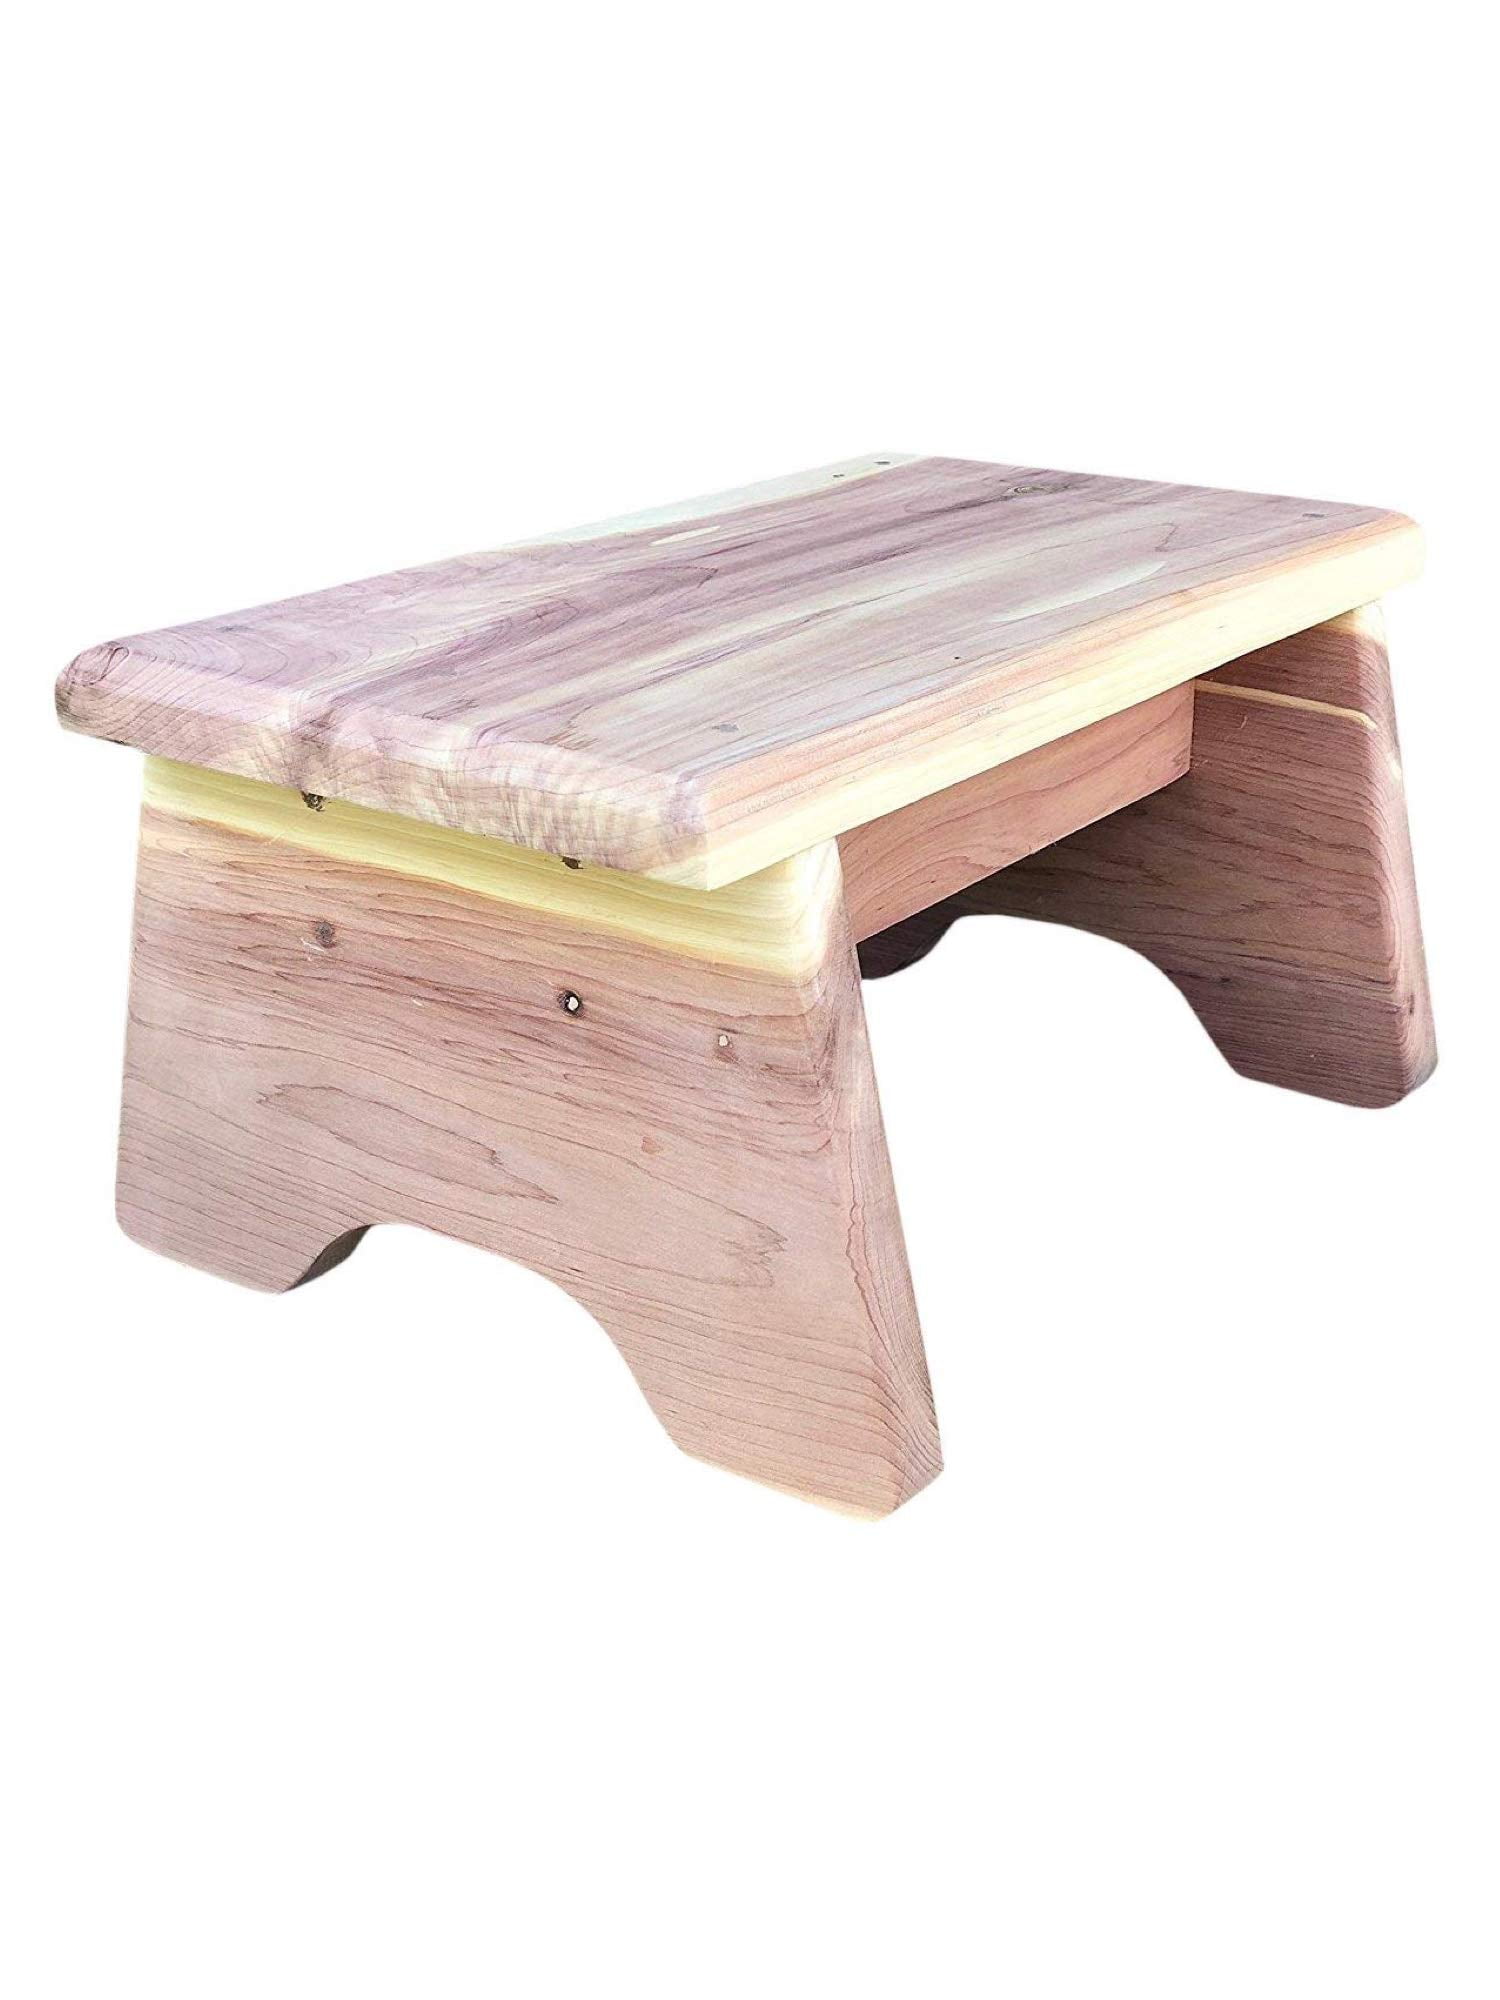 SOLID Oak wooden wood Foot stool step Amish MADE IN USA QUALITY HANDY 